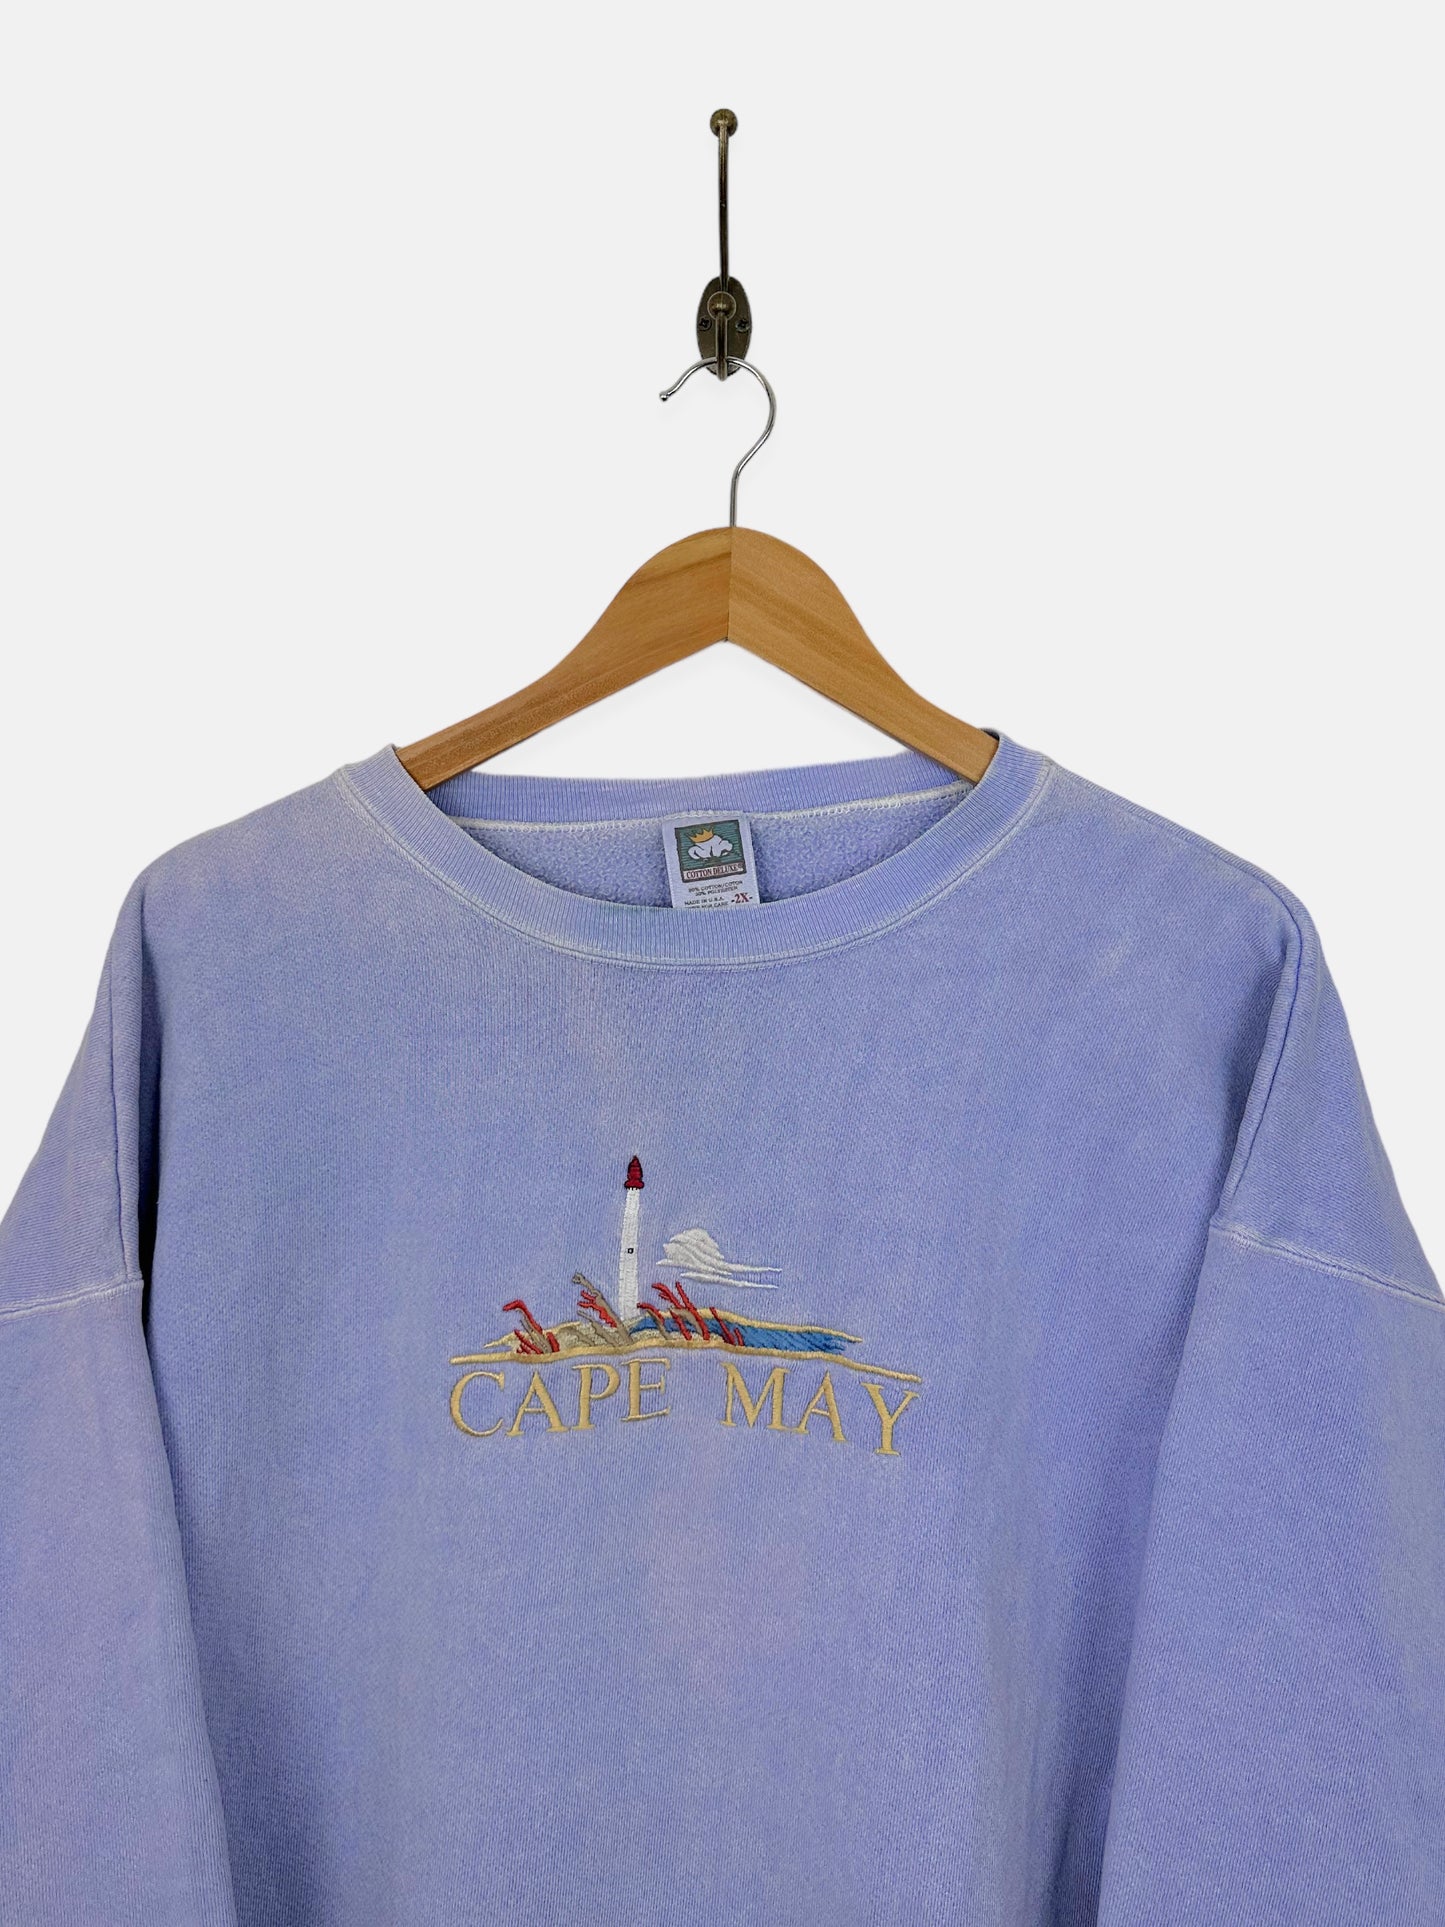 90's Cape May USA Made Embroidered Vintage Sweatshirt Size 2-3XL